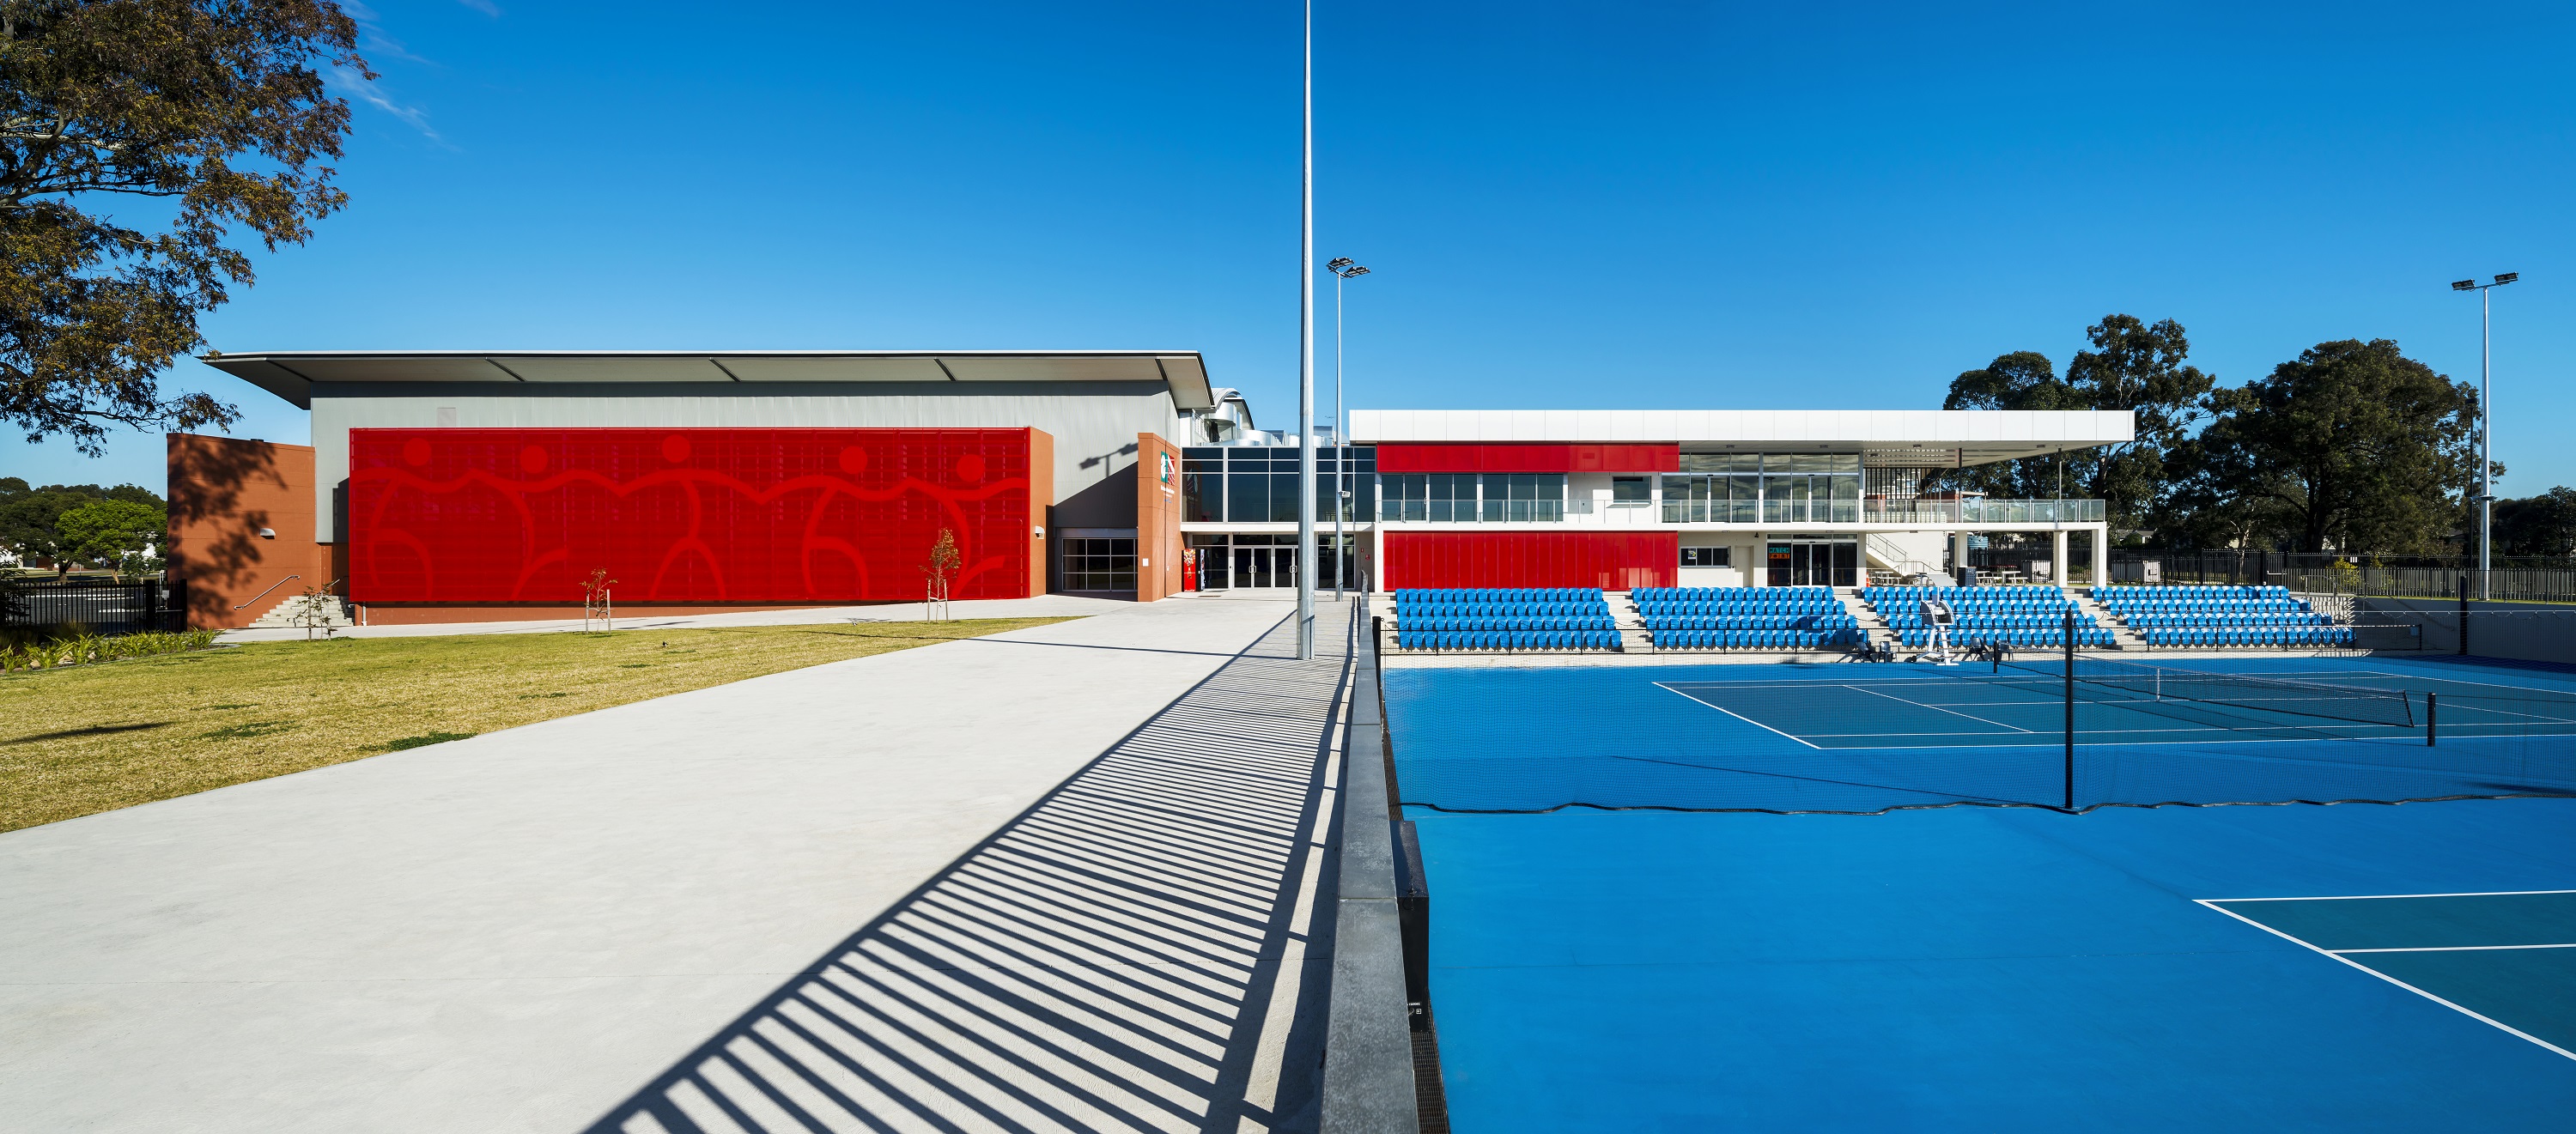 Red Perforated metal - Blacktown tennis centre mural wall